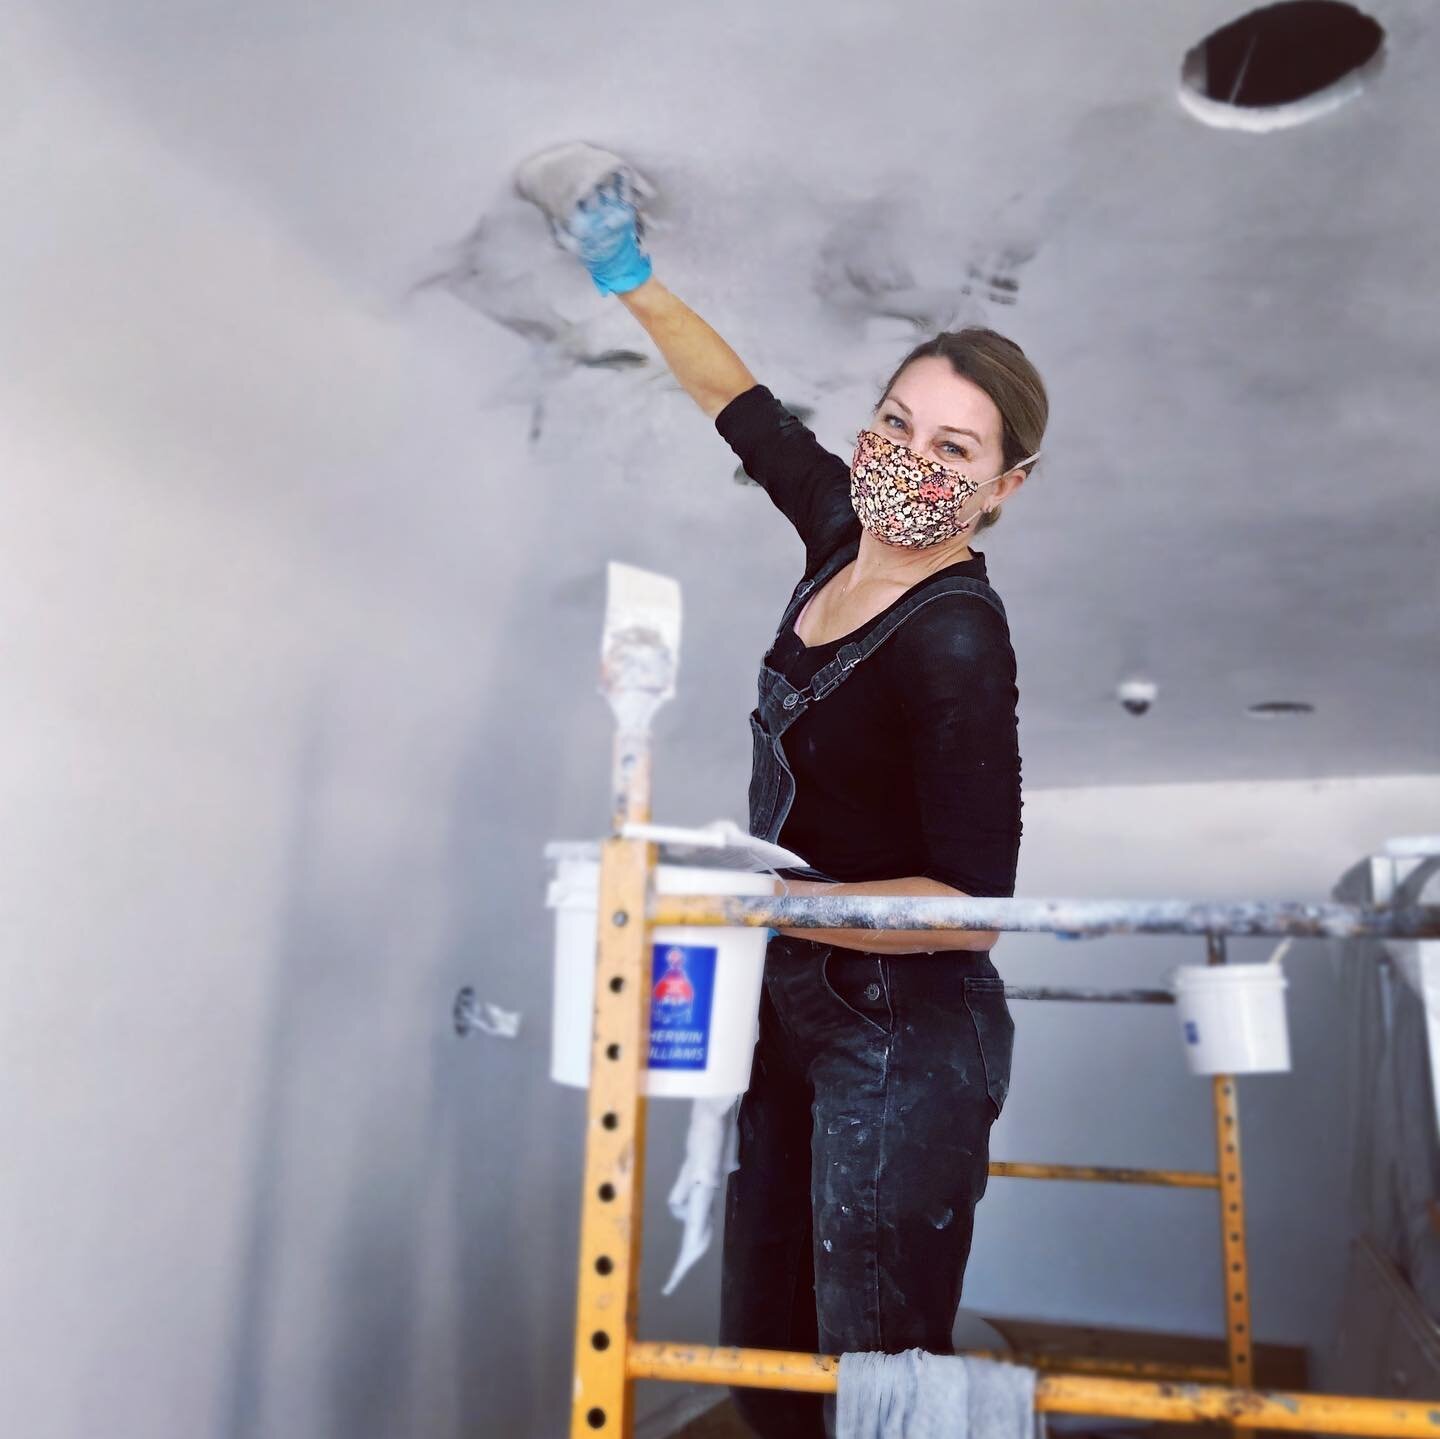 Wrapping up 2020 with a mighty fine faux finish!  Be sure to check out @ciaociaopiadina when they open in 2021 😋!

#h2finishes #fauxfinishes  #hospitalityinteriors